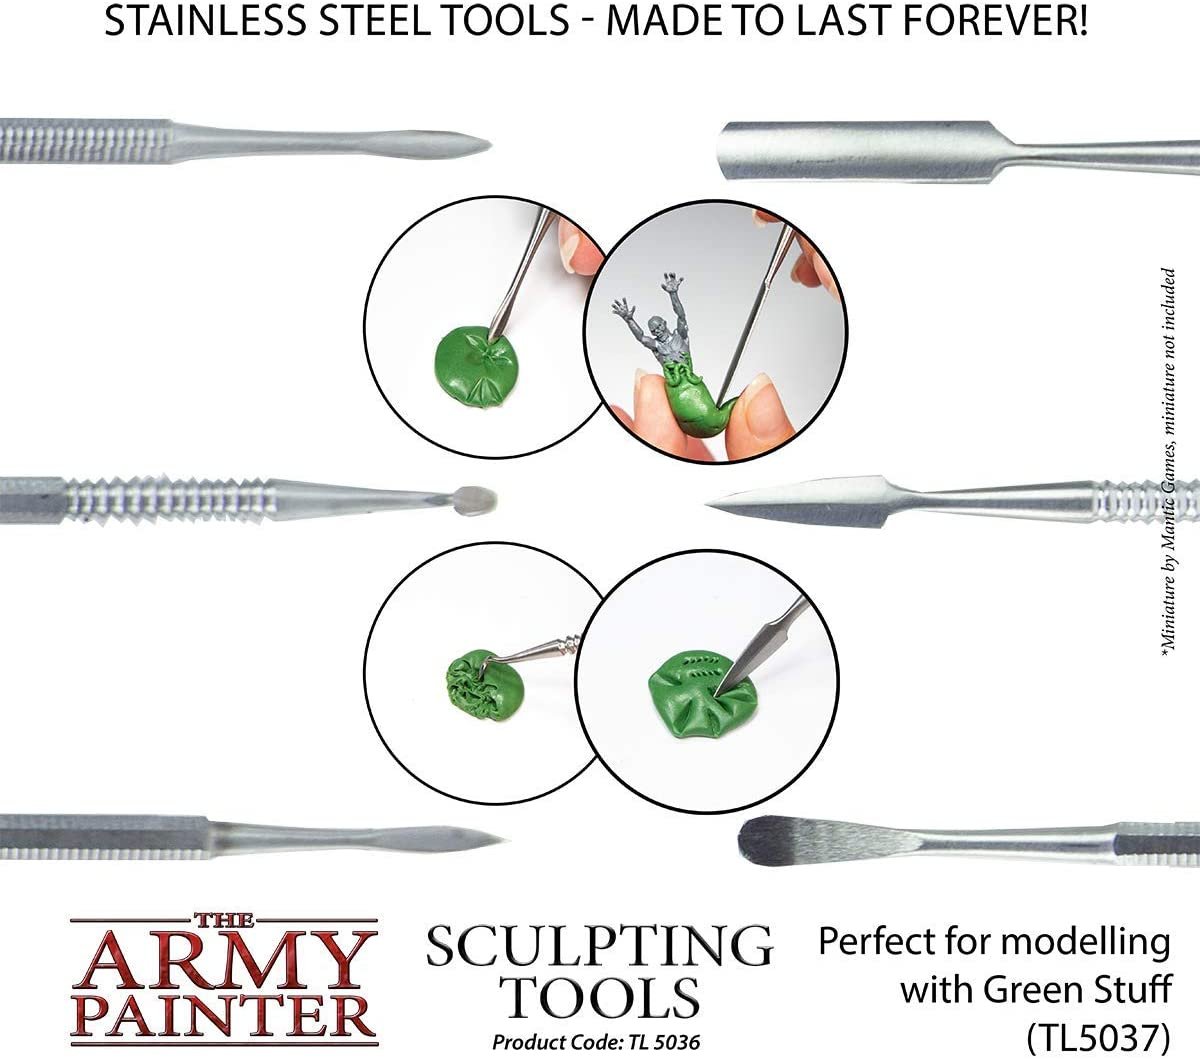 The Army Painter - Miniature and Model Sculpting Tools